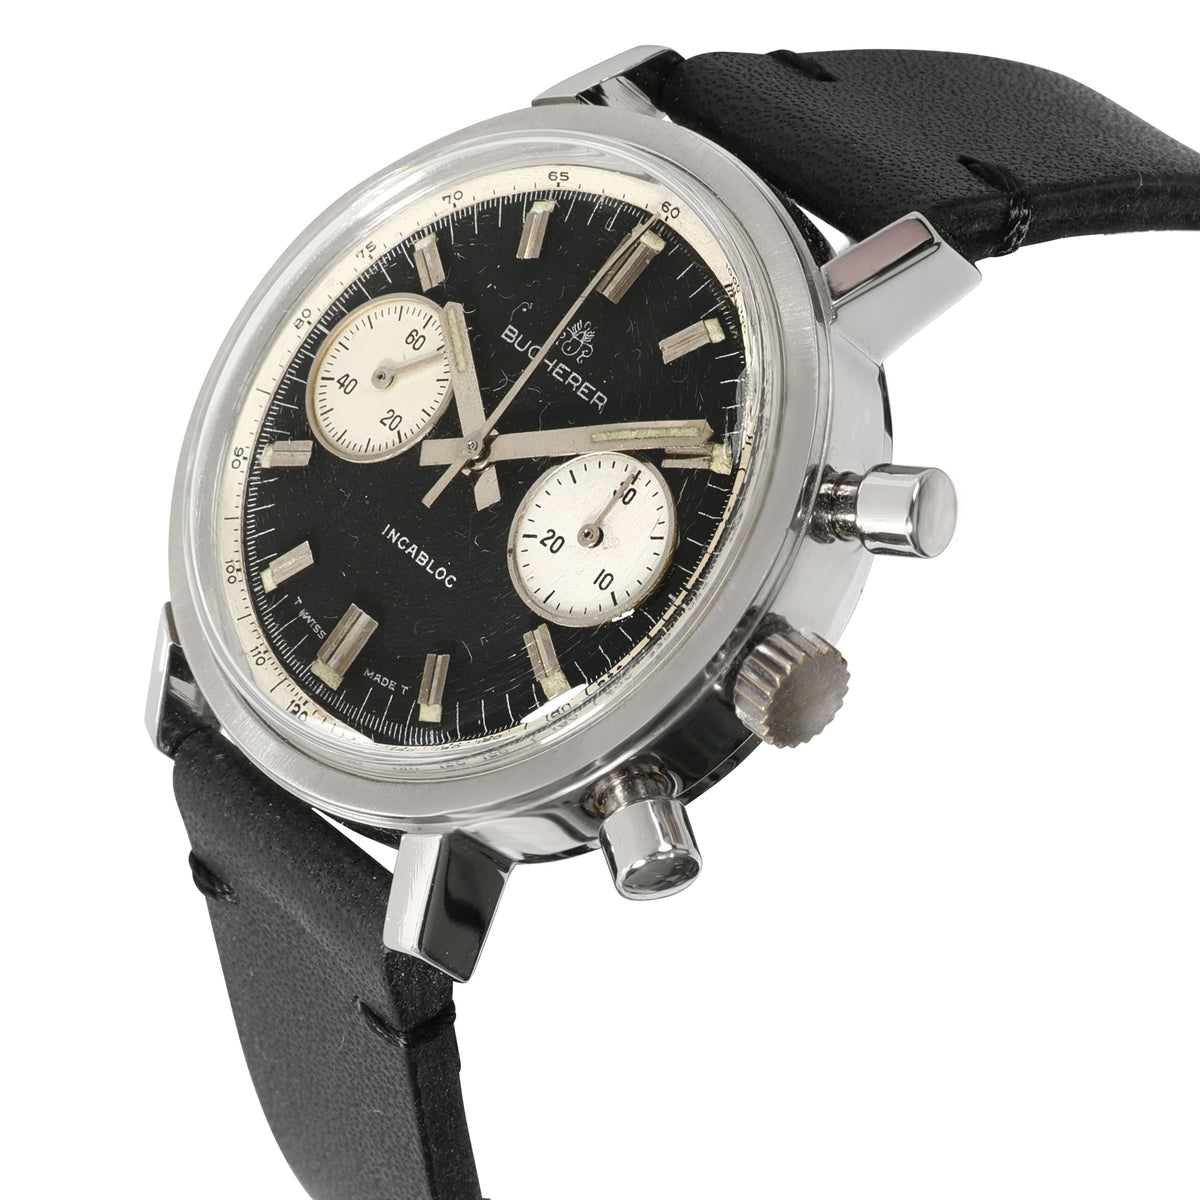 Chrono Chrono Men's Vintage Watch in Stainless Steel